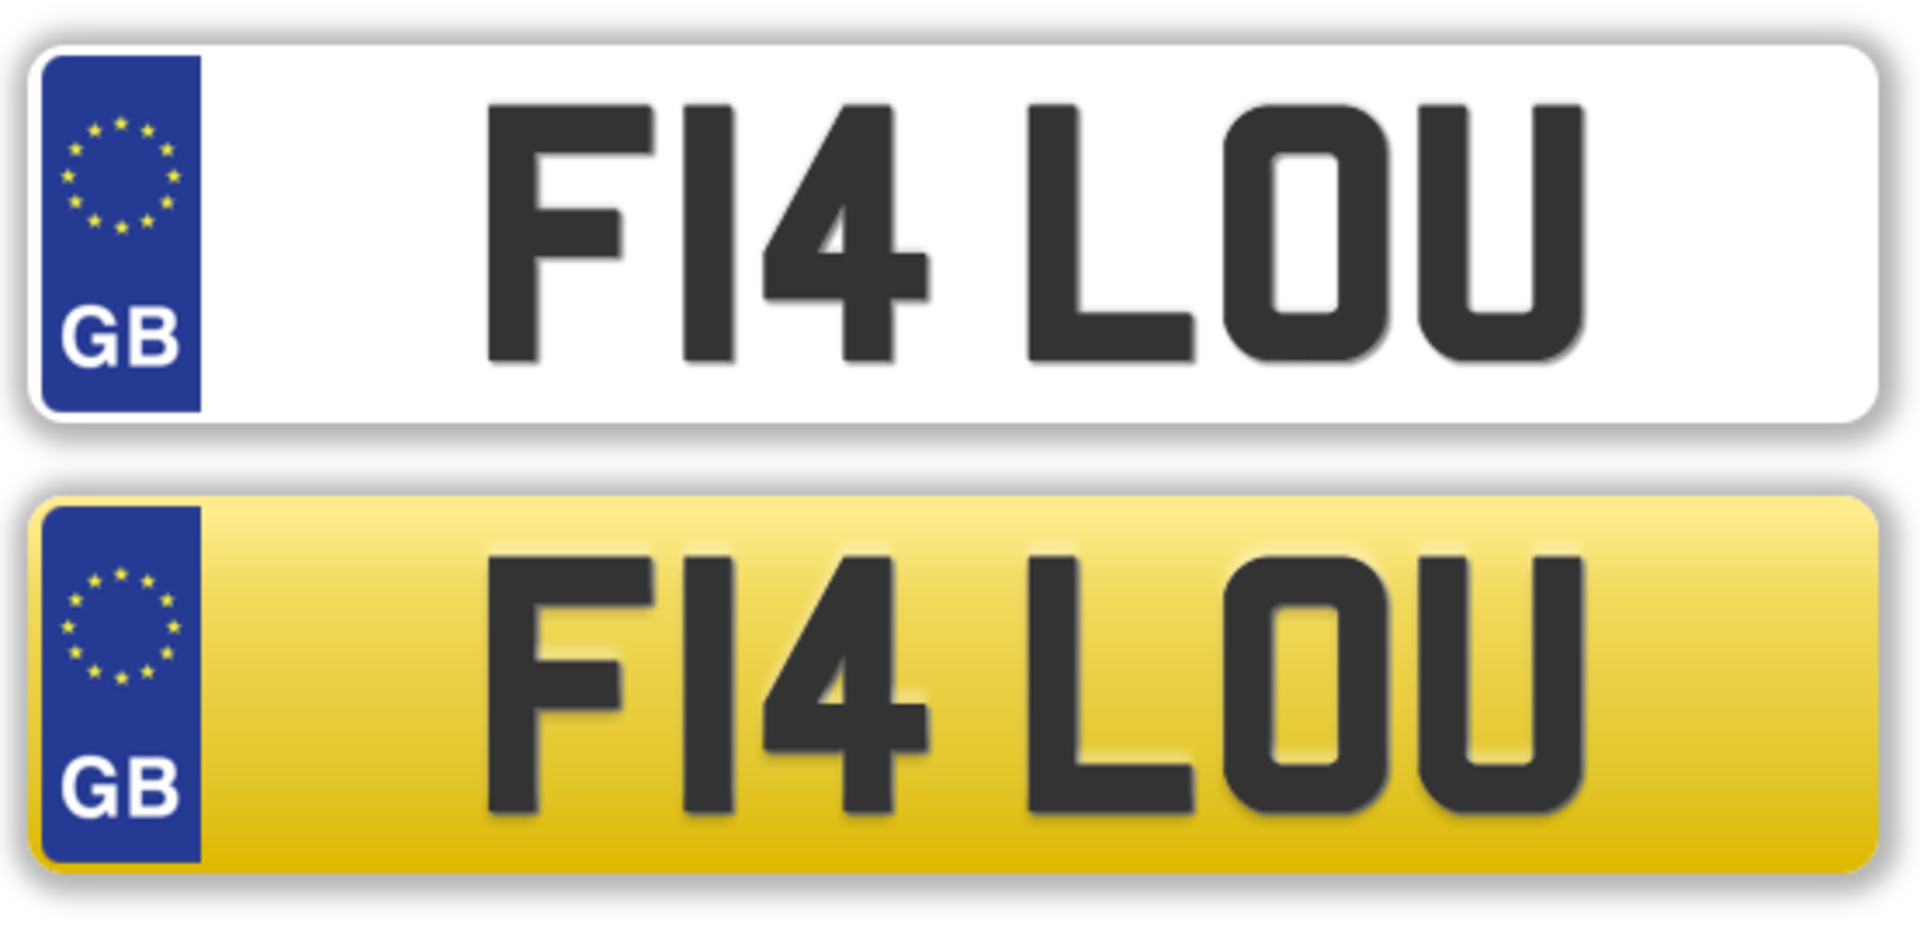 Cherished Plate - F14 LOU - No transfer fees. All registrations on retention and ready to transfer.